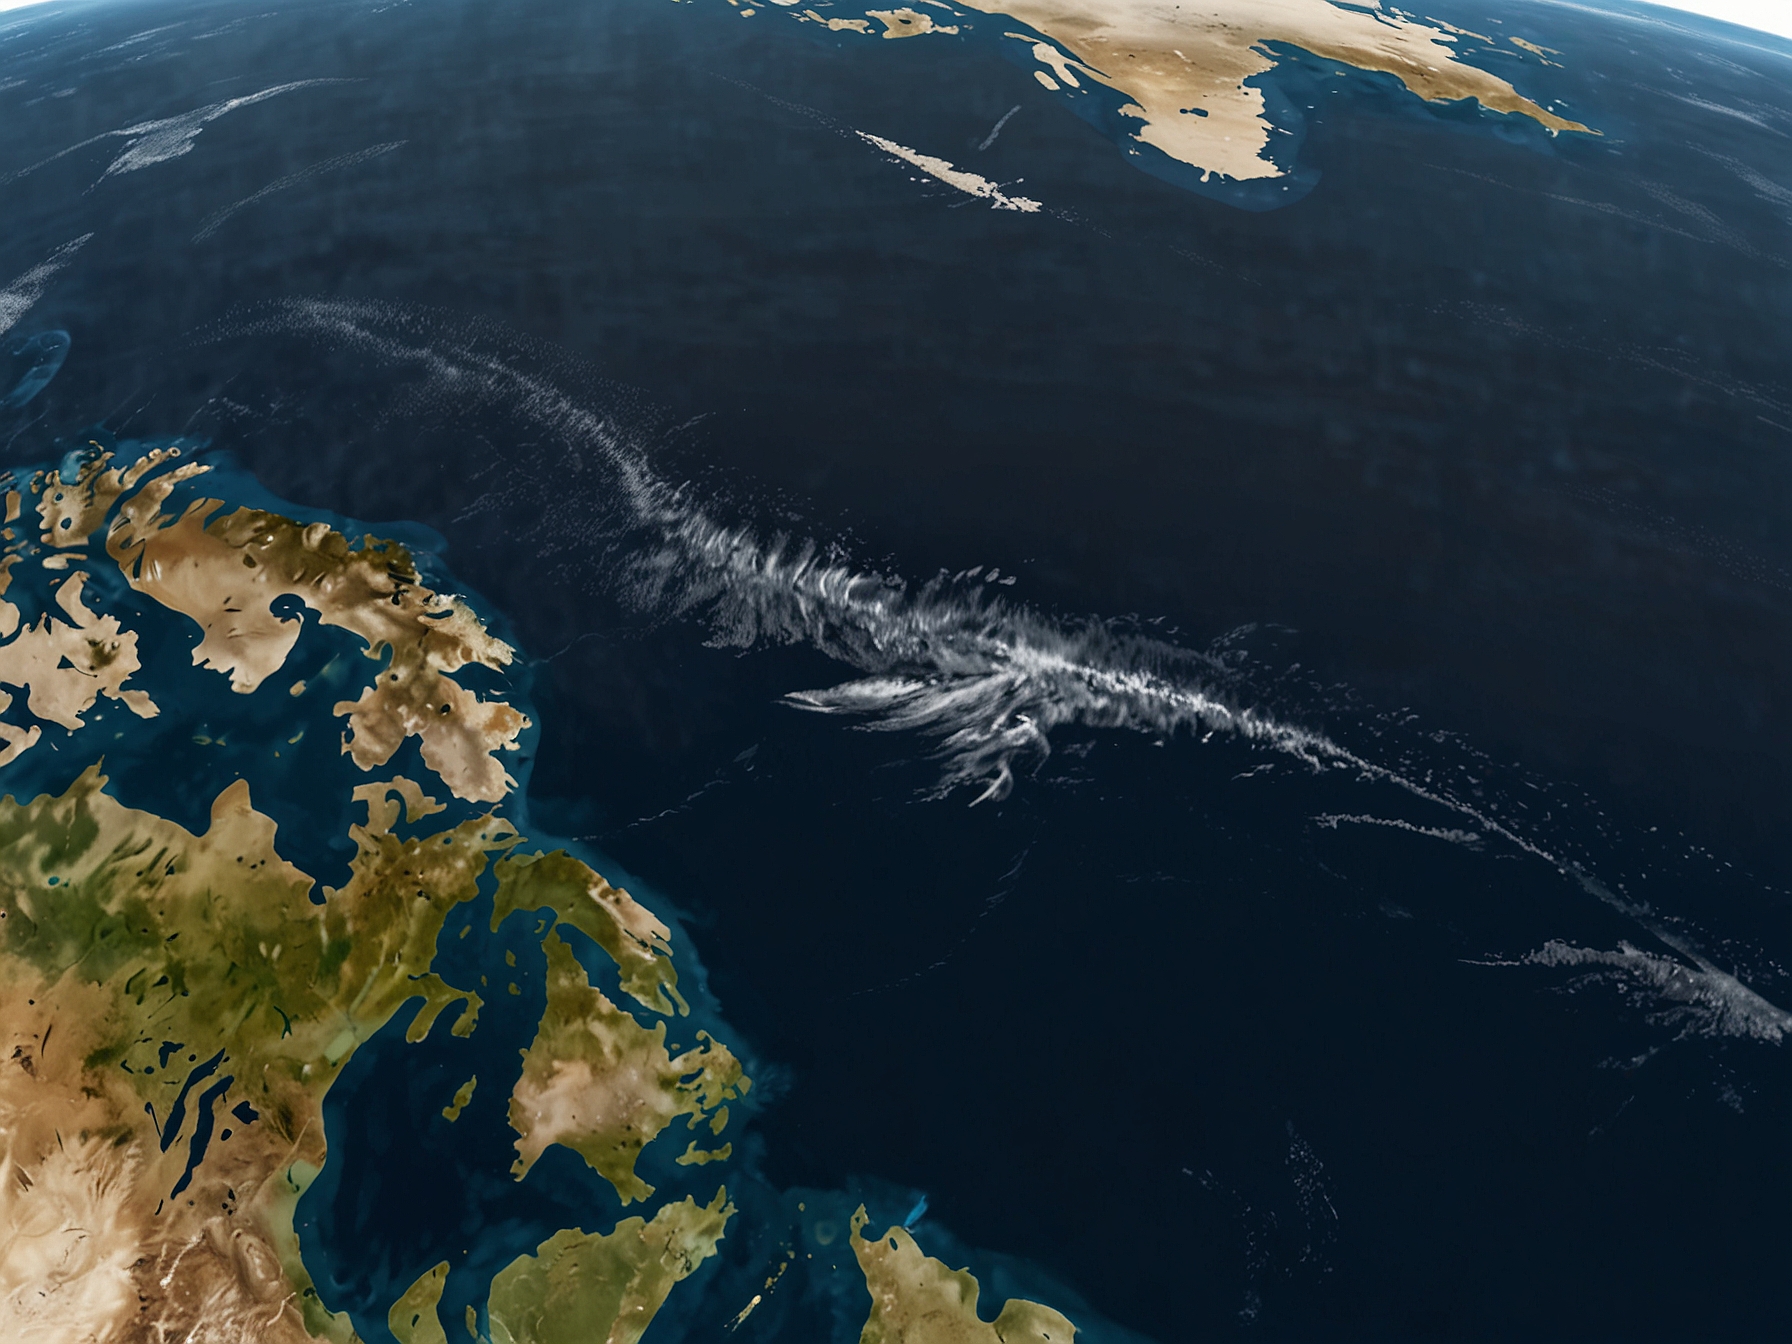 A satellite image showing the vast ocean areas off the coast of Canada, indicating the critical habitats and migration routes of the North Atlantic right whales.